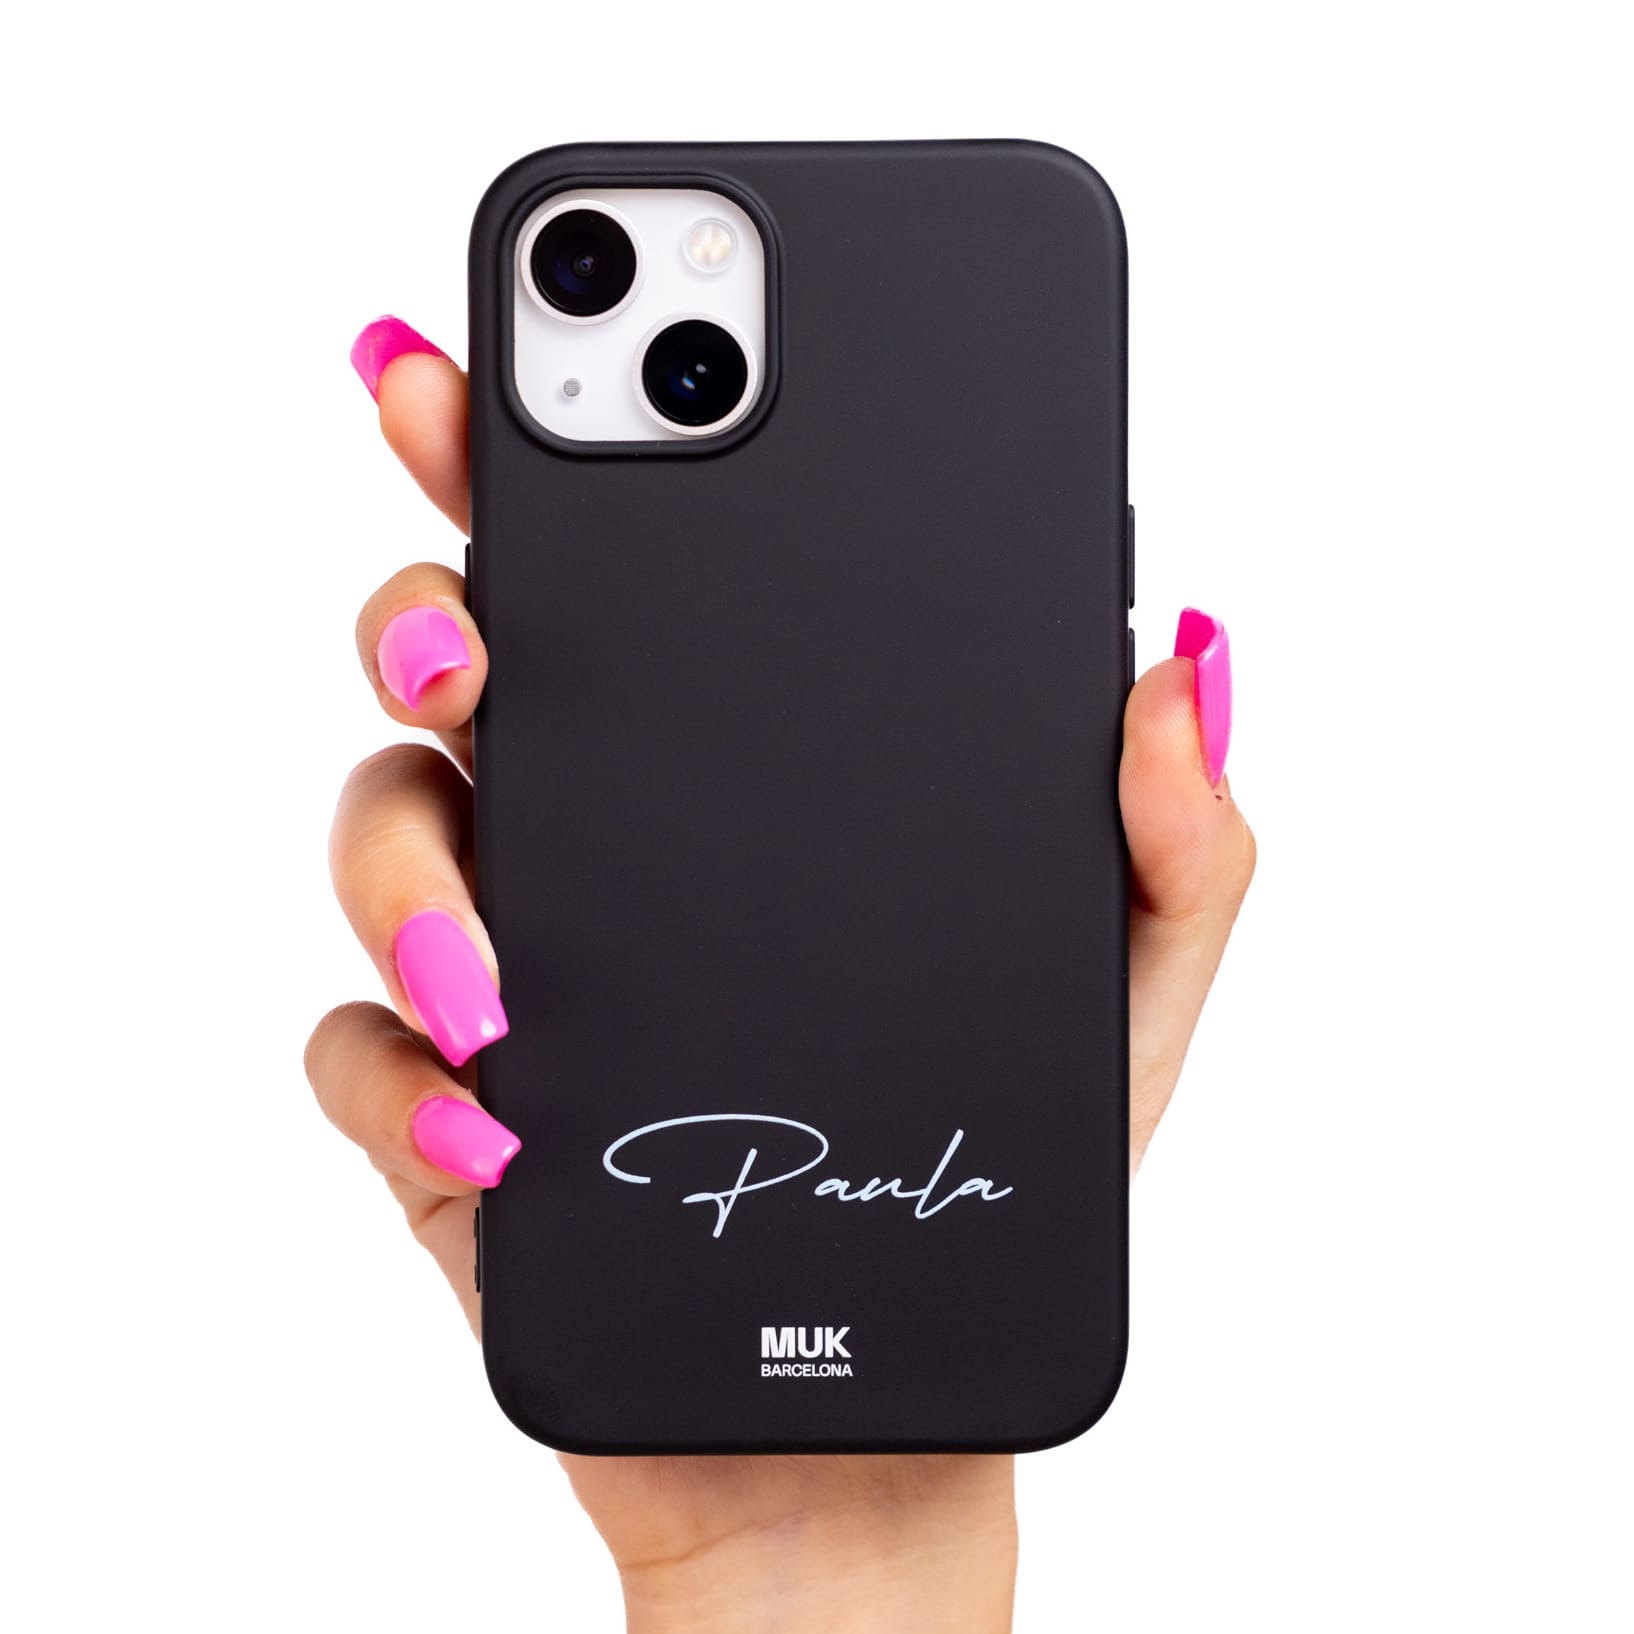  Black TPU  case personalized with a name horizontally with elegant typography in 10 different colors.
